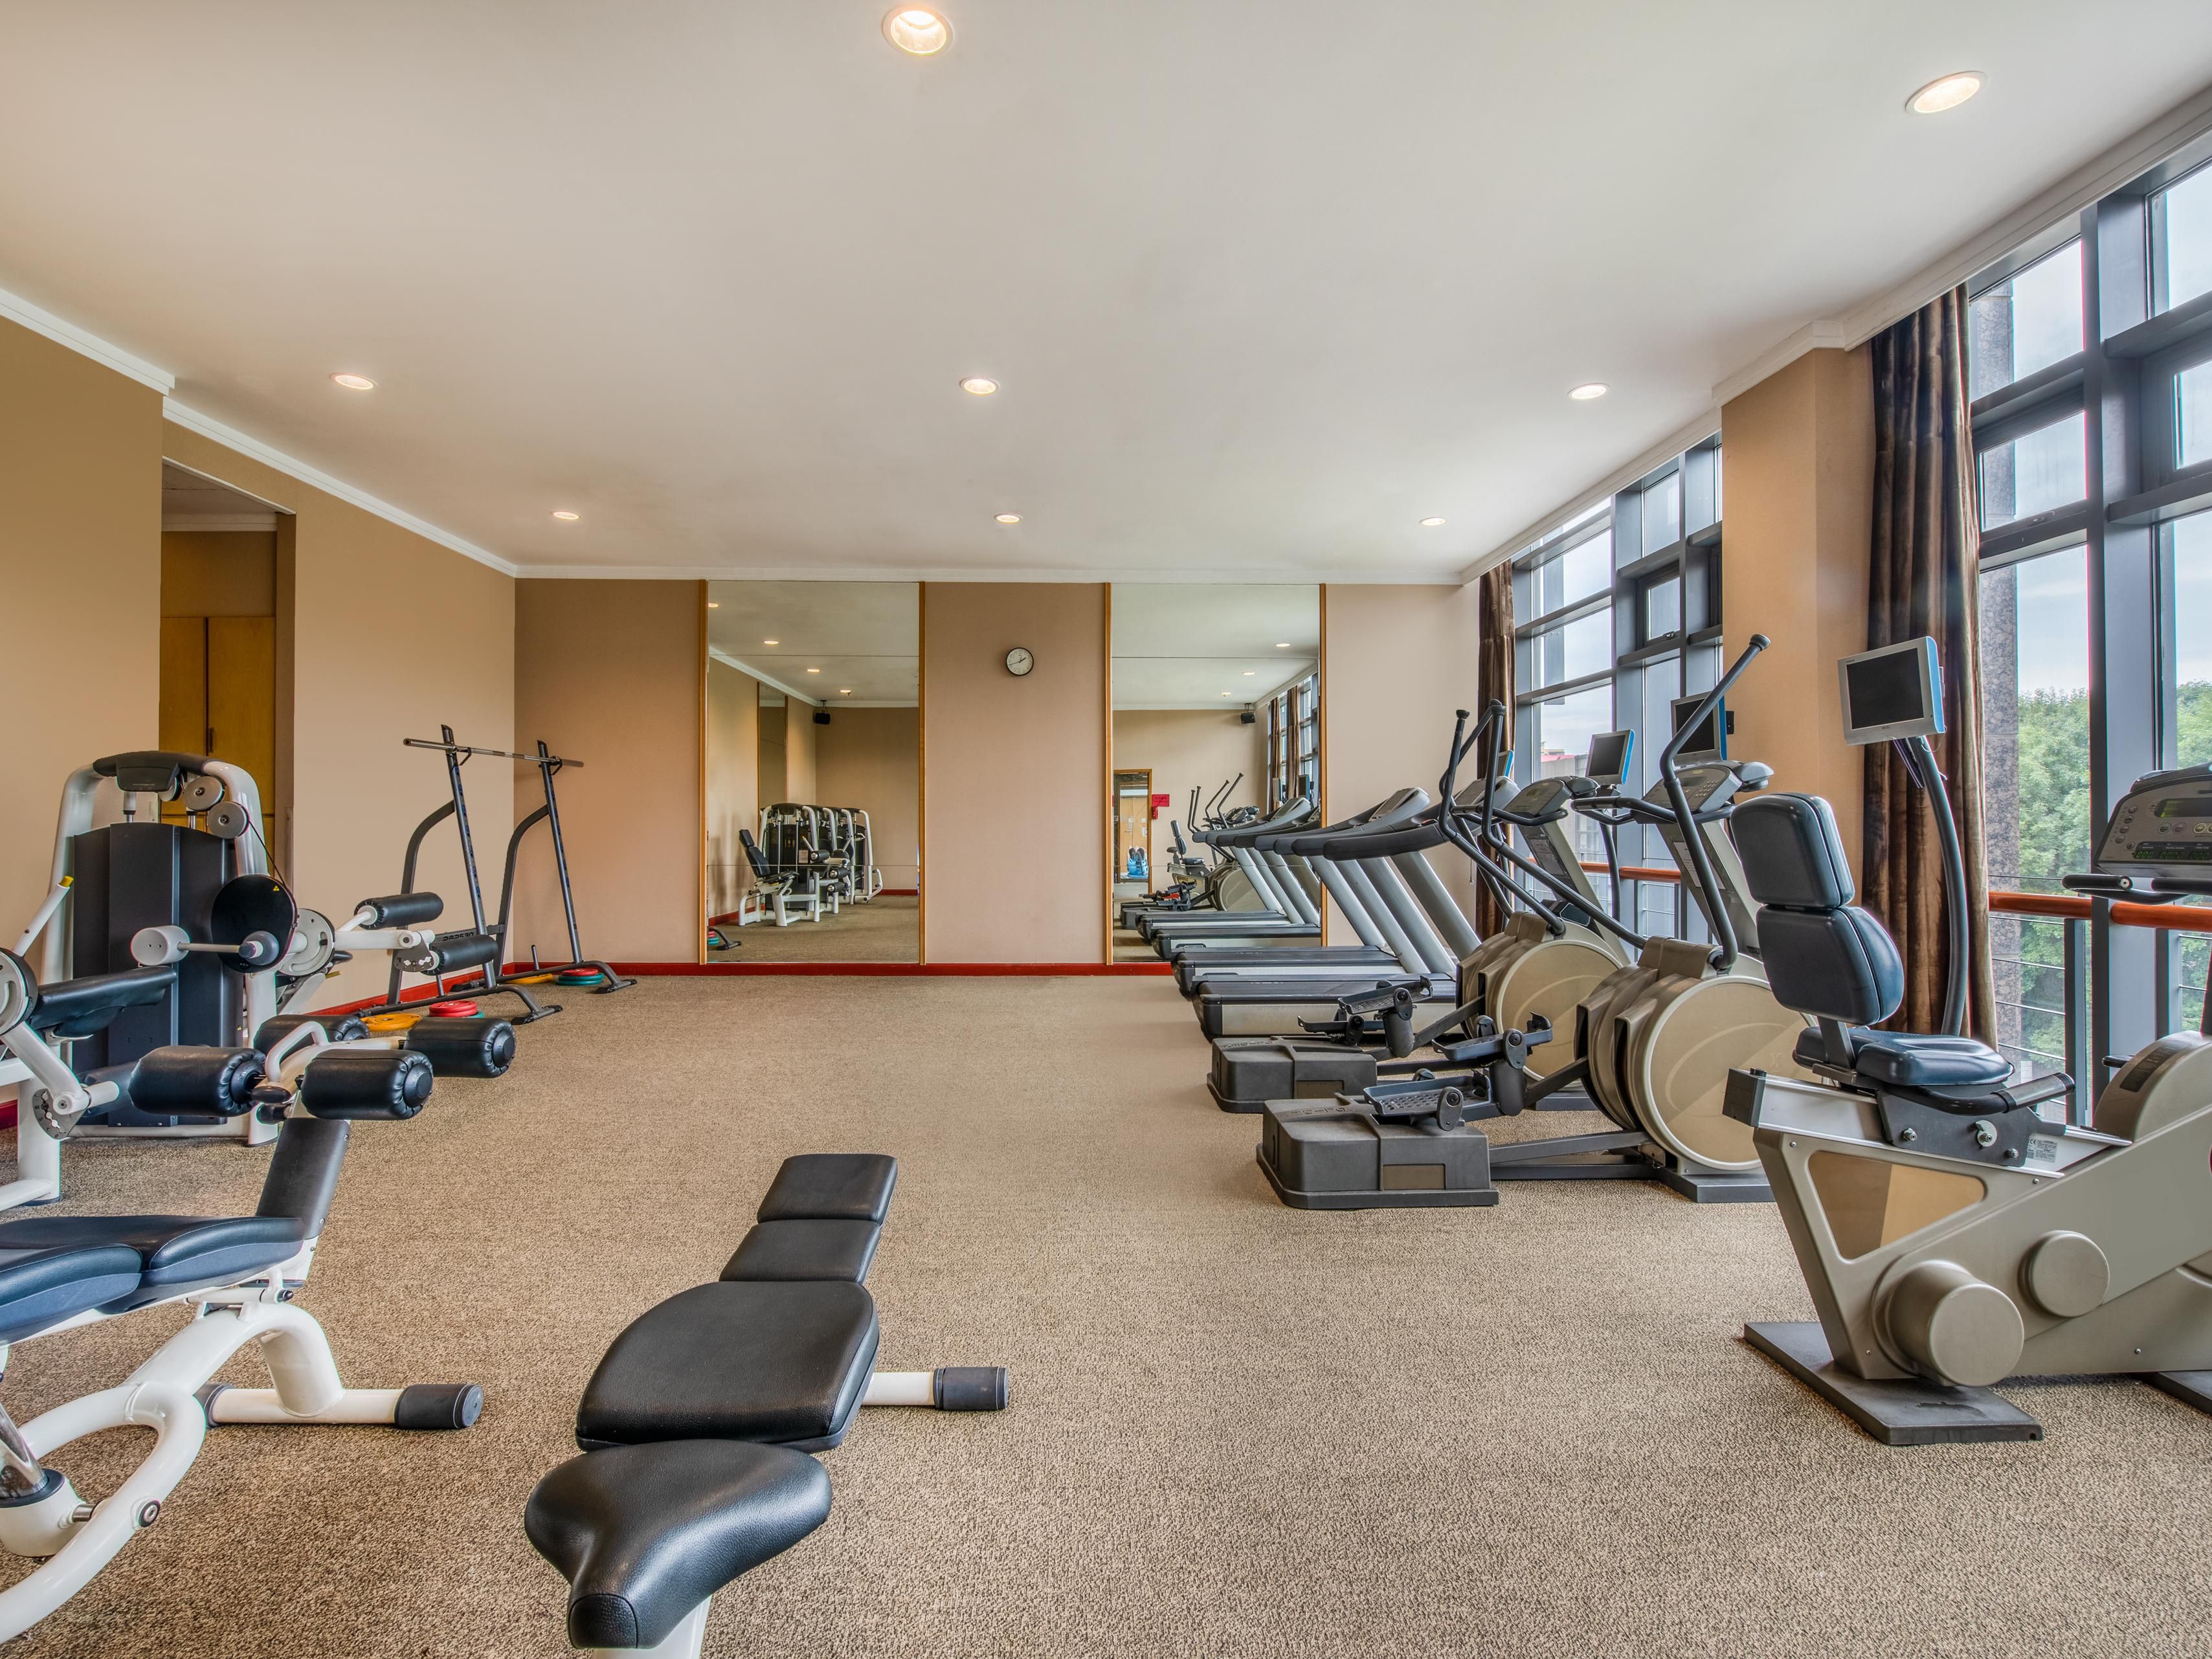 How to relax after a day of work? How can you keep workout every day? We can help you on that. Our Health Club equips with various fitness equipment, indoor swimming pool, which can meet your needs for workout. The sauna room and steam room can make you relax.